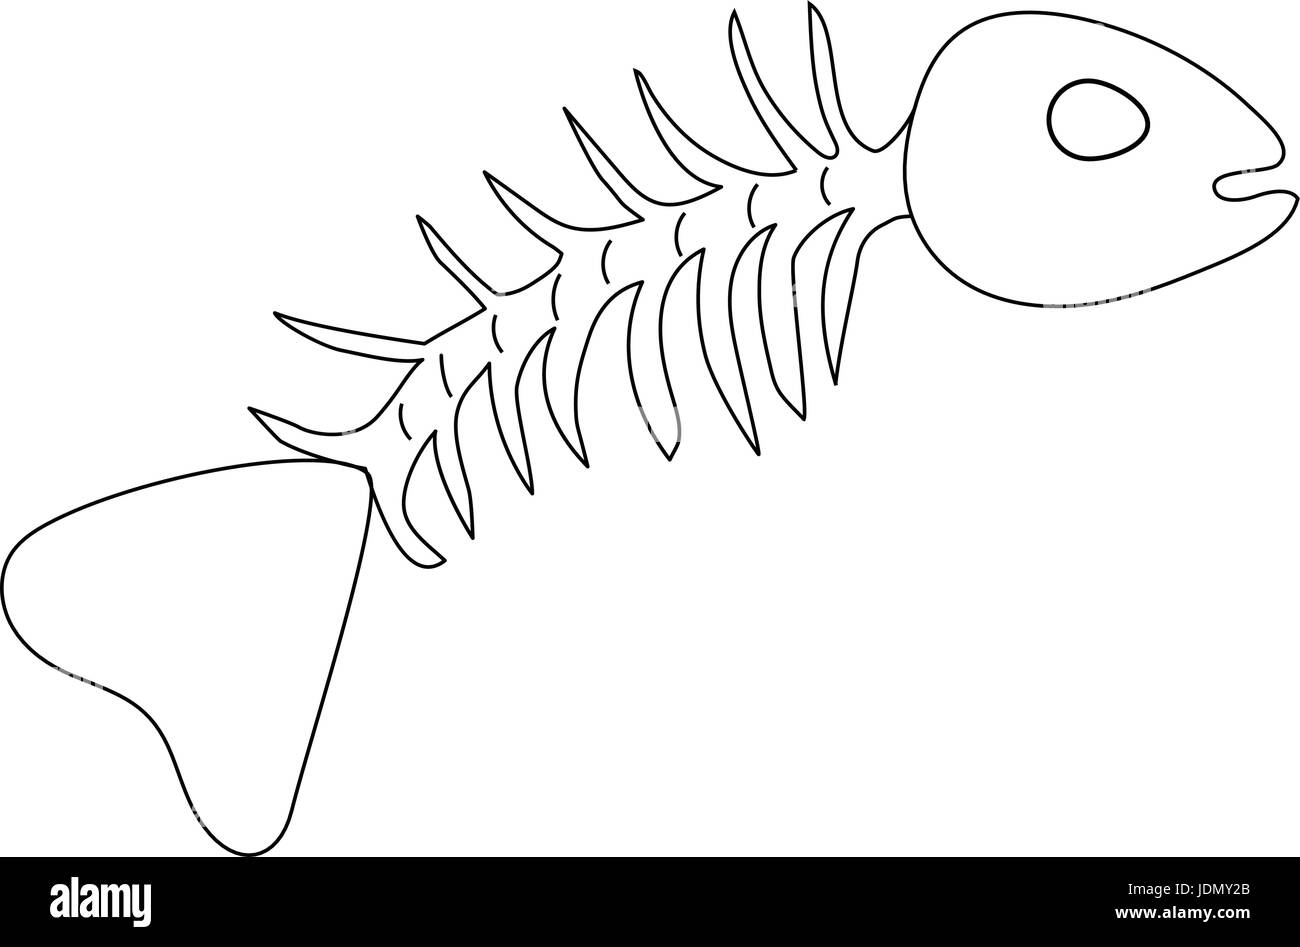 Simple skeleton fish drawing on white background Stock Vector